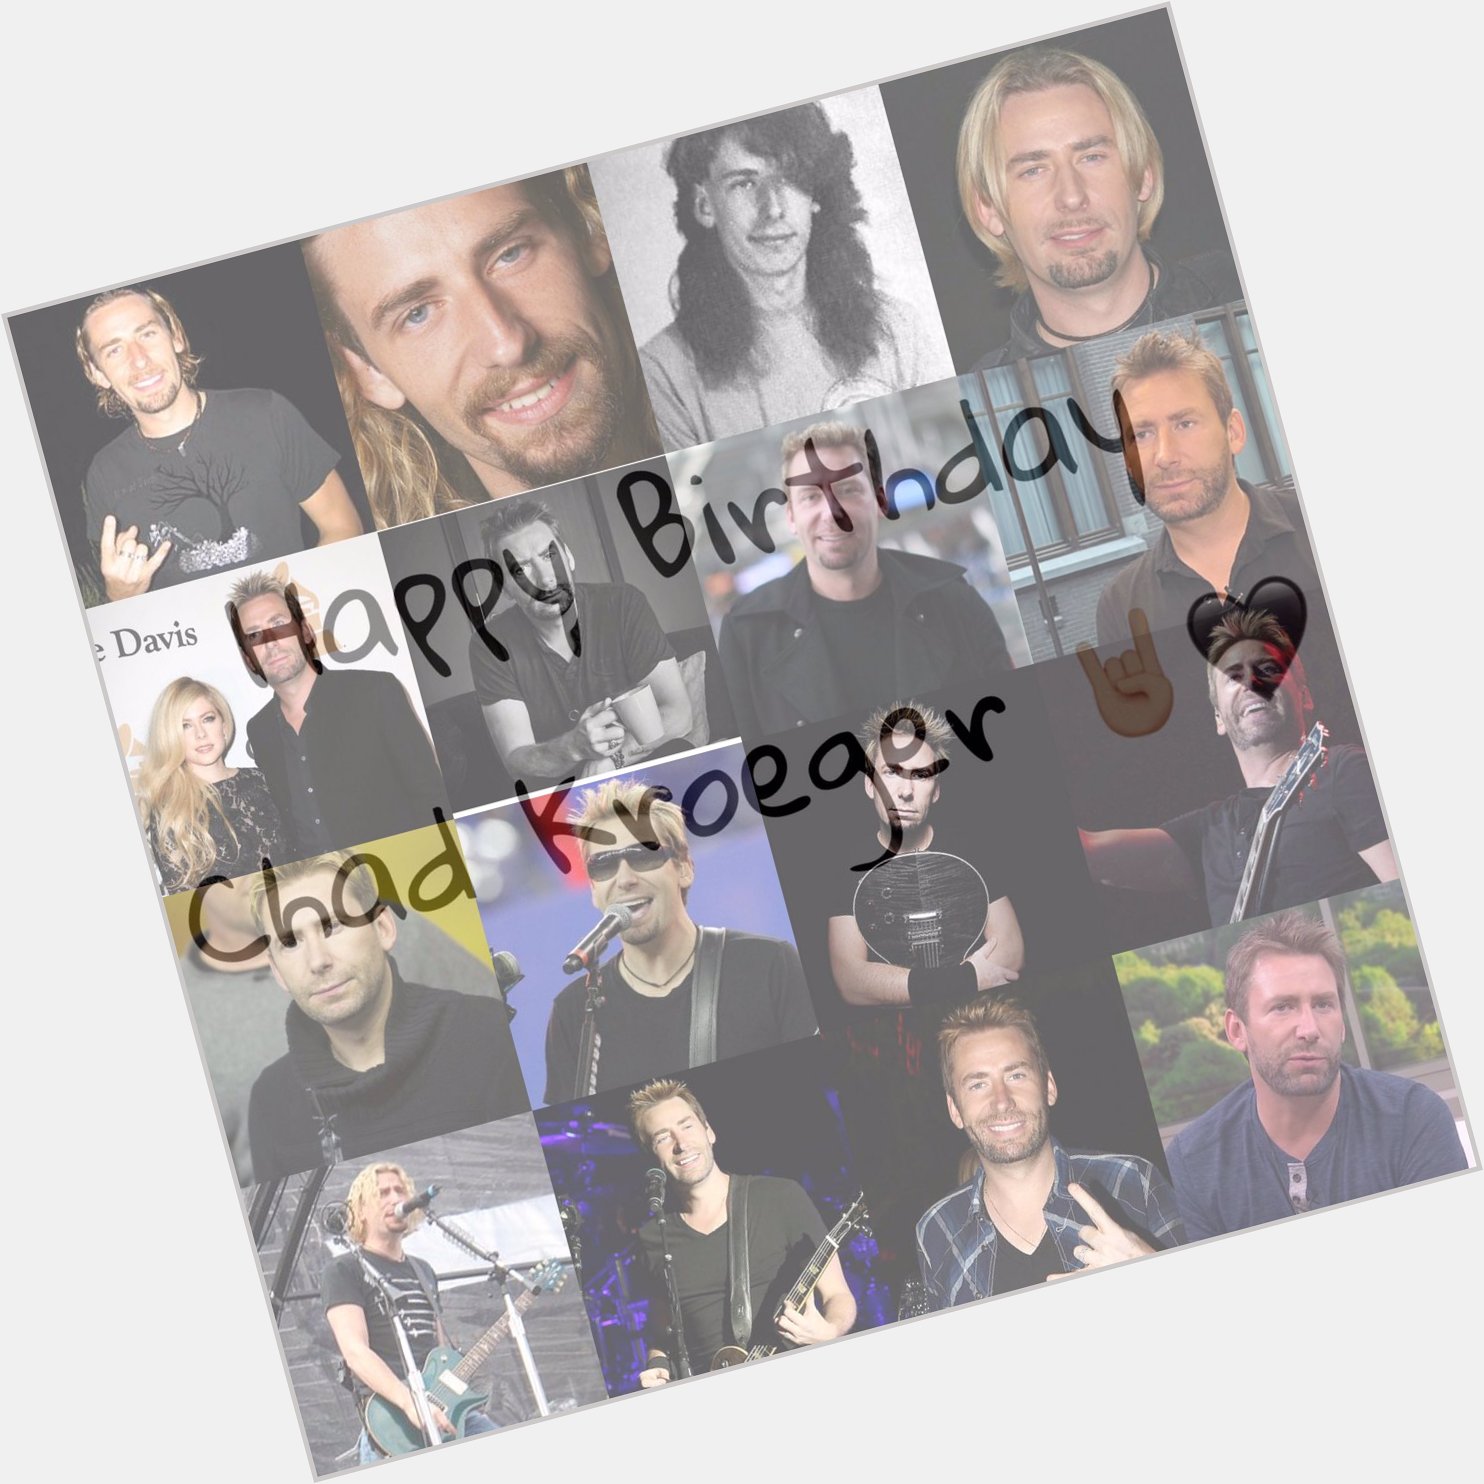  happy Birthday to the one and only Mr. Chad kroeger    